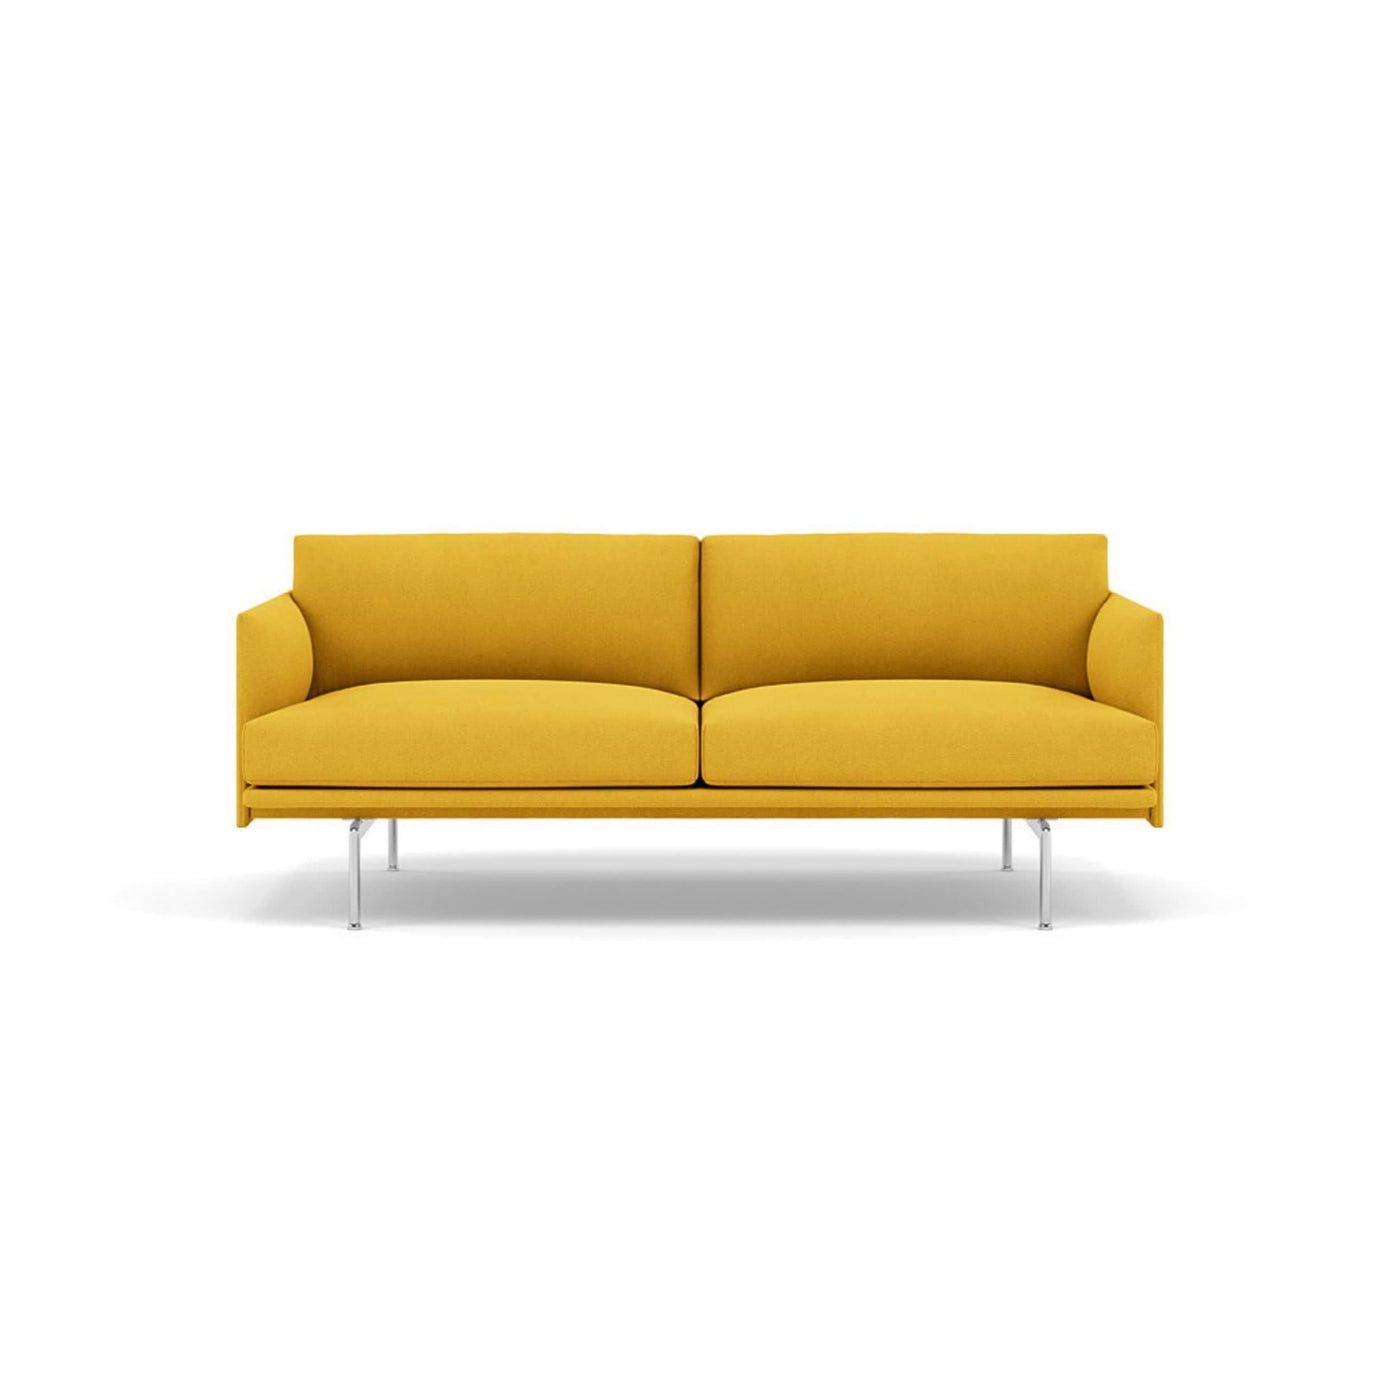 Muuto Outline 2 seater sofa in hallingdal 457 yellow fabric and polished aluminium legs. Made to order from someday designs. #colour_hallingdal-457